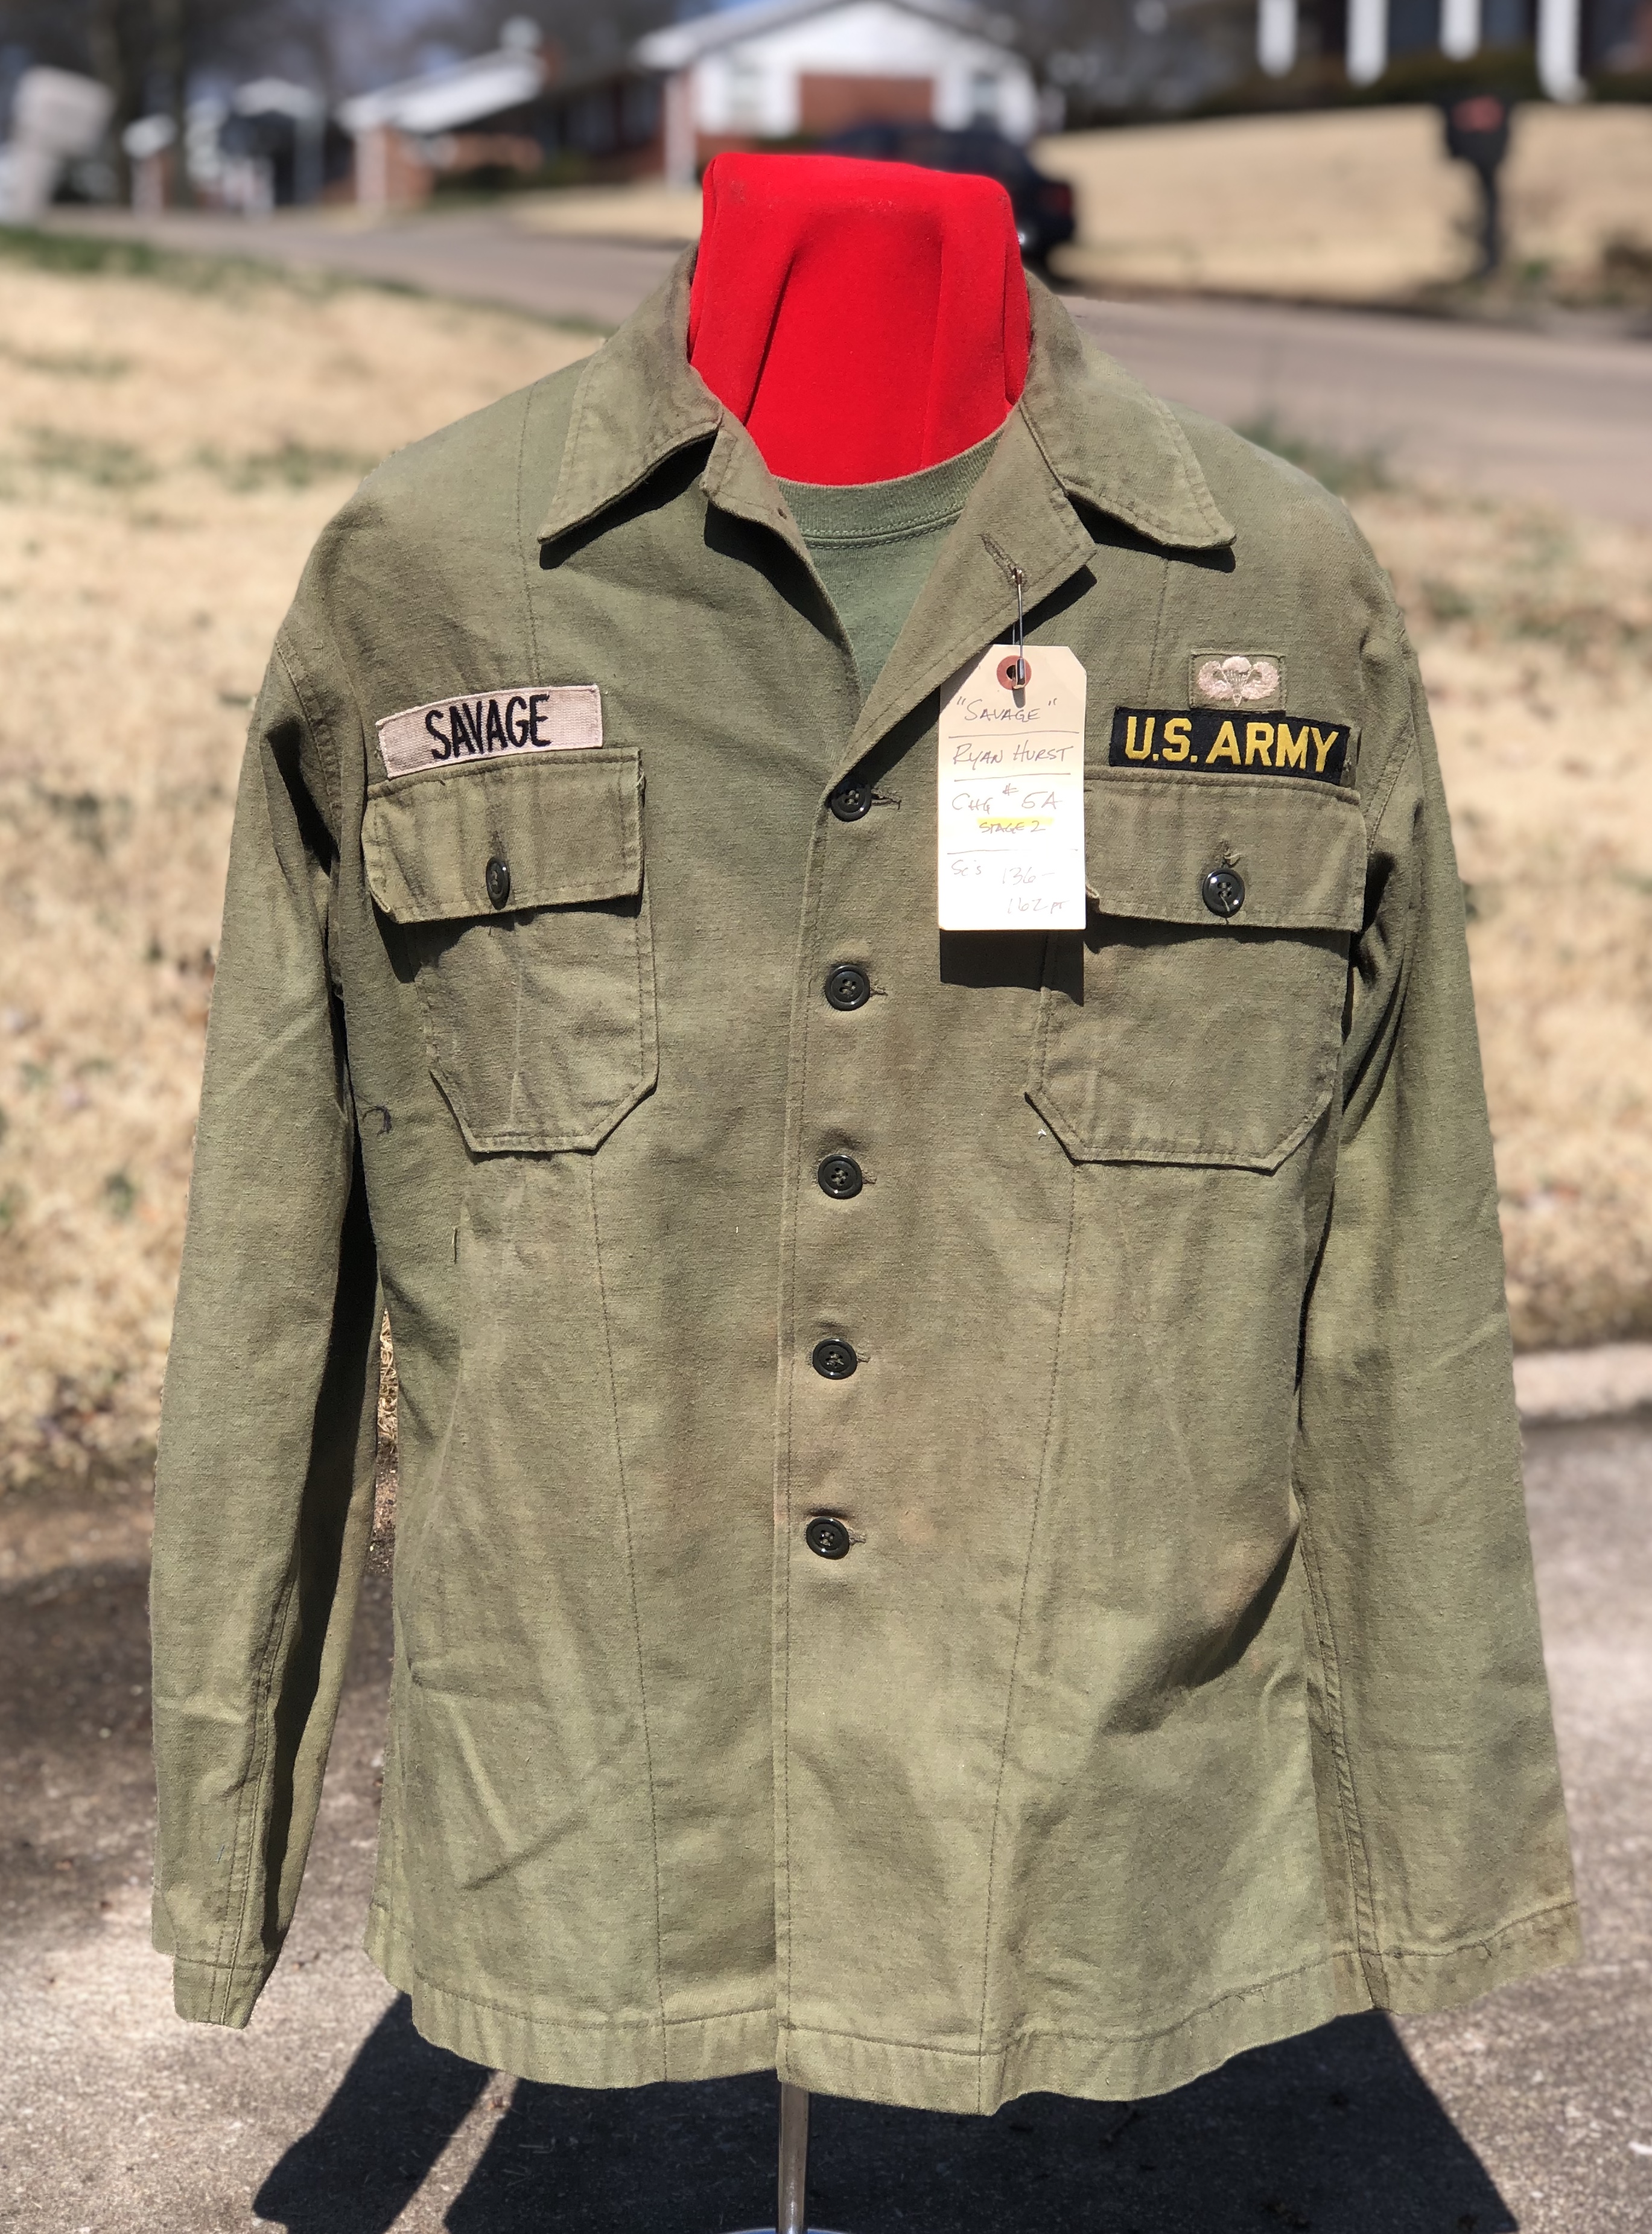 We Were Soldiers Collection | Page 3 | RPF Costume and Prop Maker Community